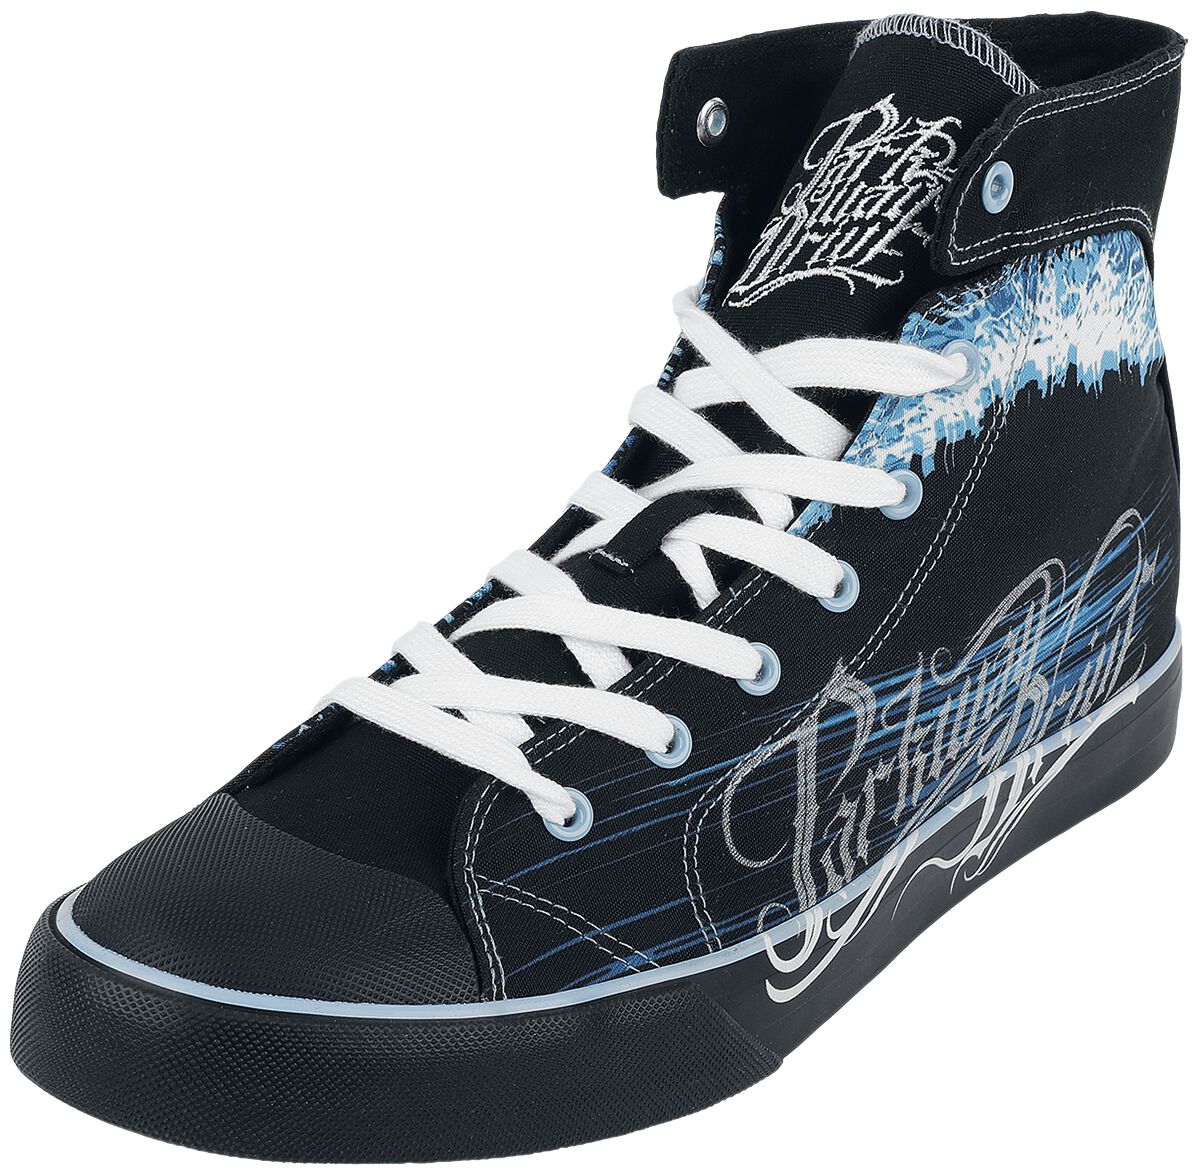 Parkway Drive EMP Signature Collection Sneaker high multicolor in EU39